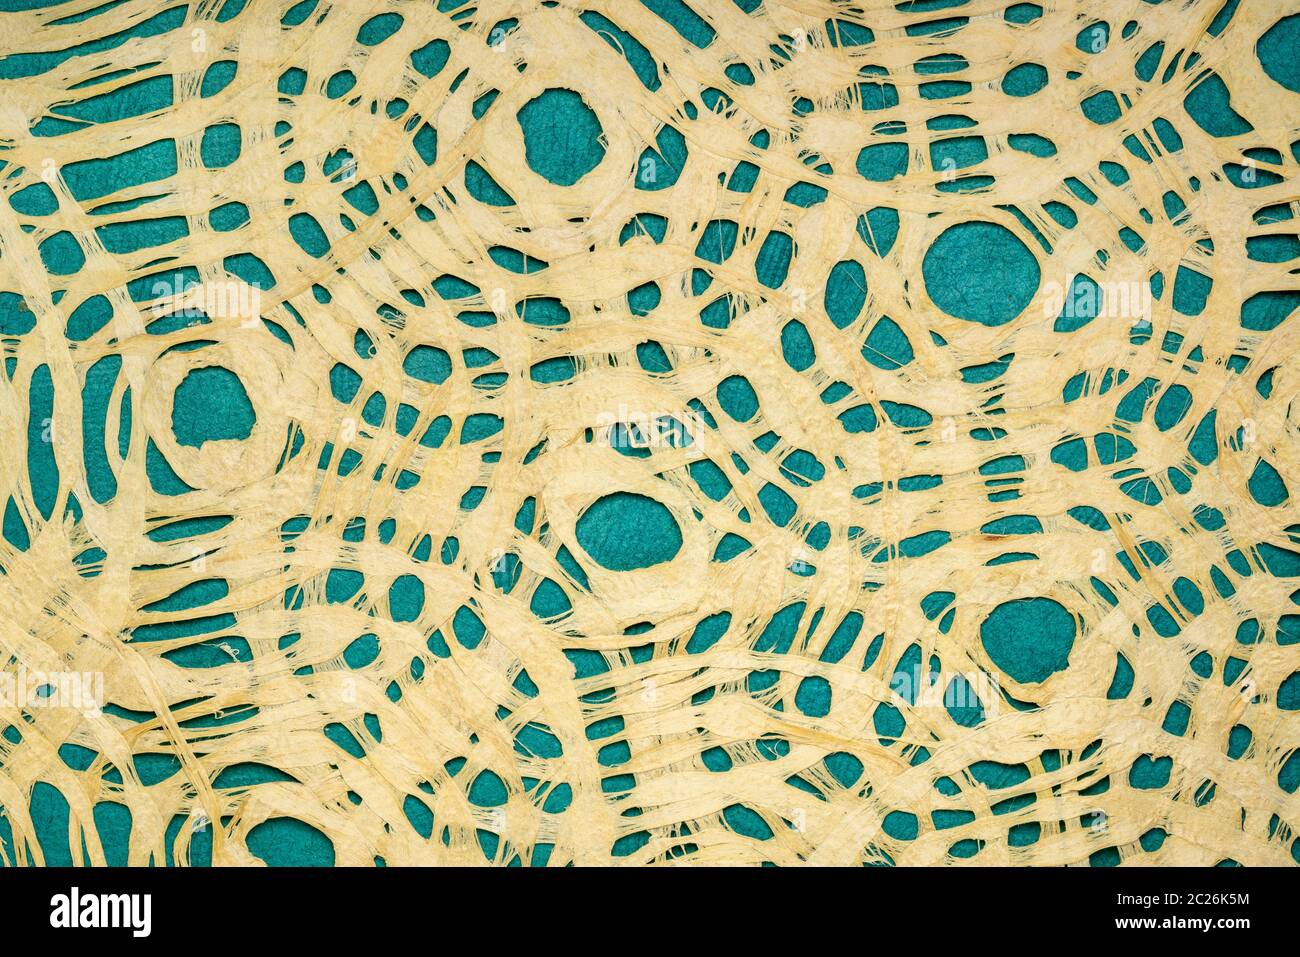 Amate bark paper with circular design against turquoise huun paper.  This ancient paper dates back to pre-Columbian and Meso-American times and is sti Stock Photo